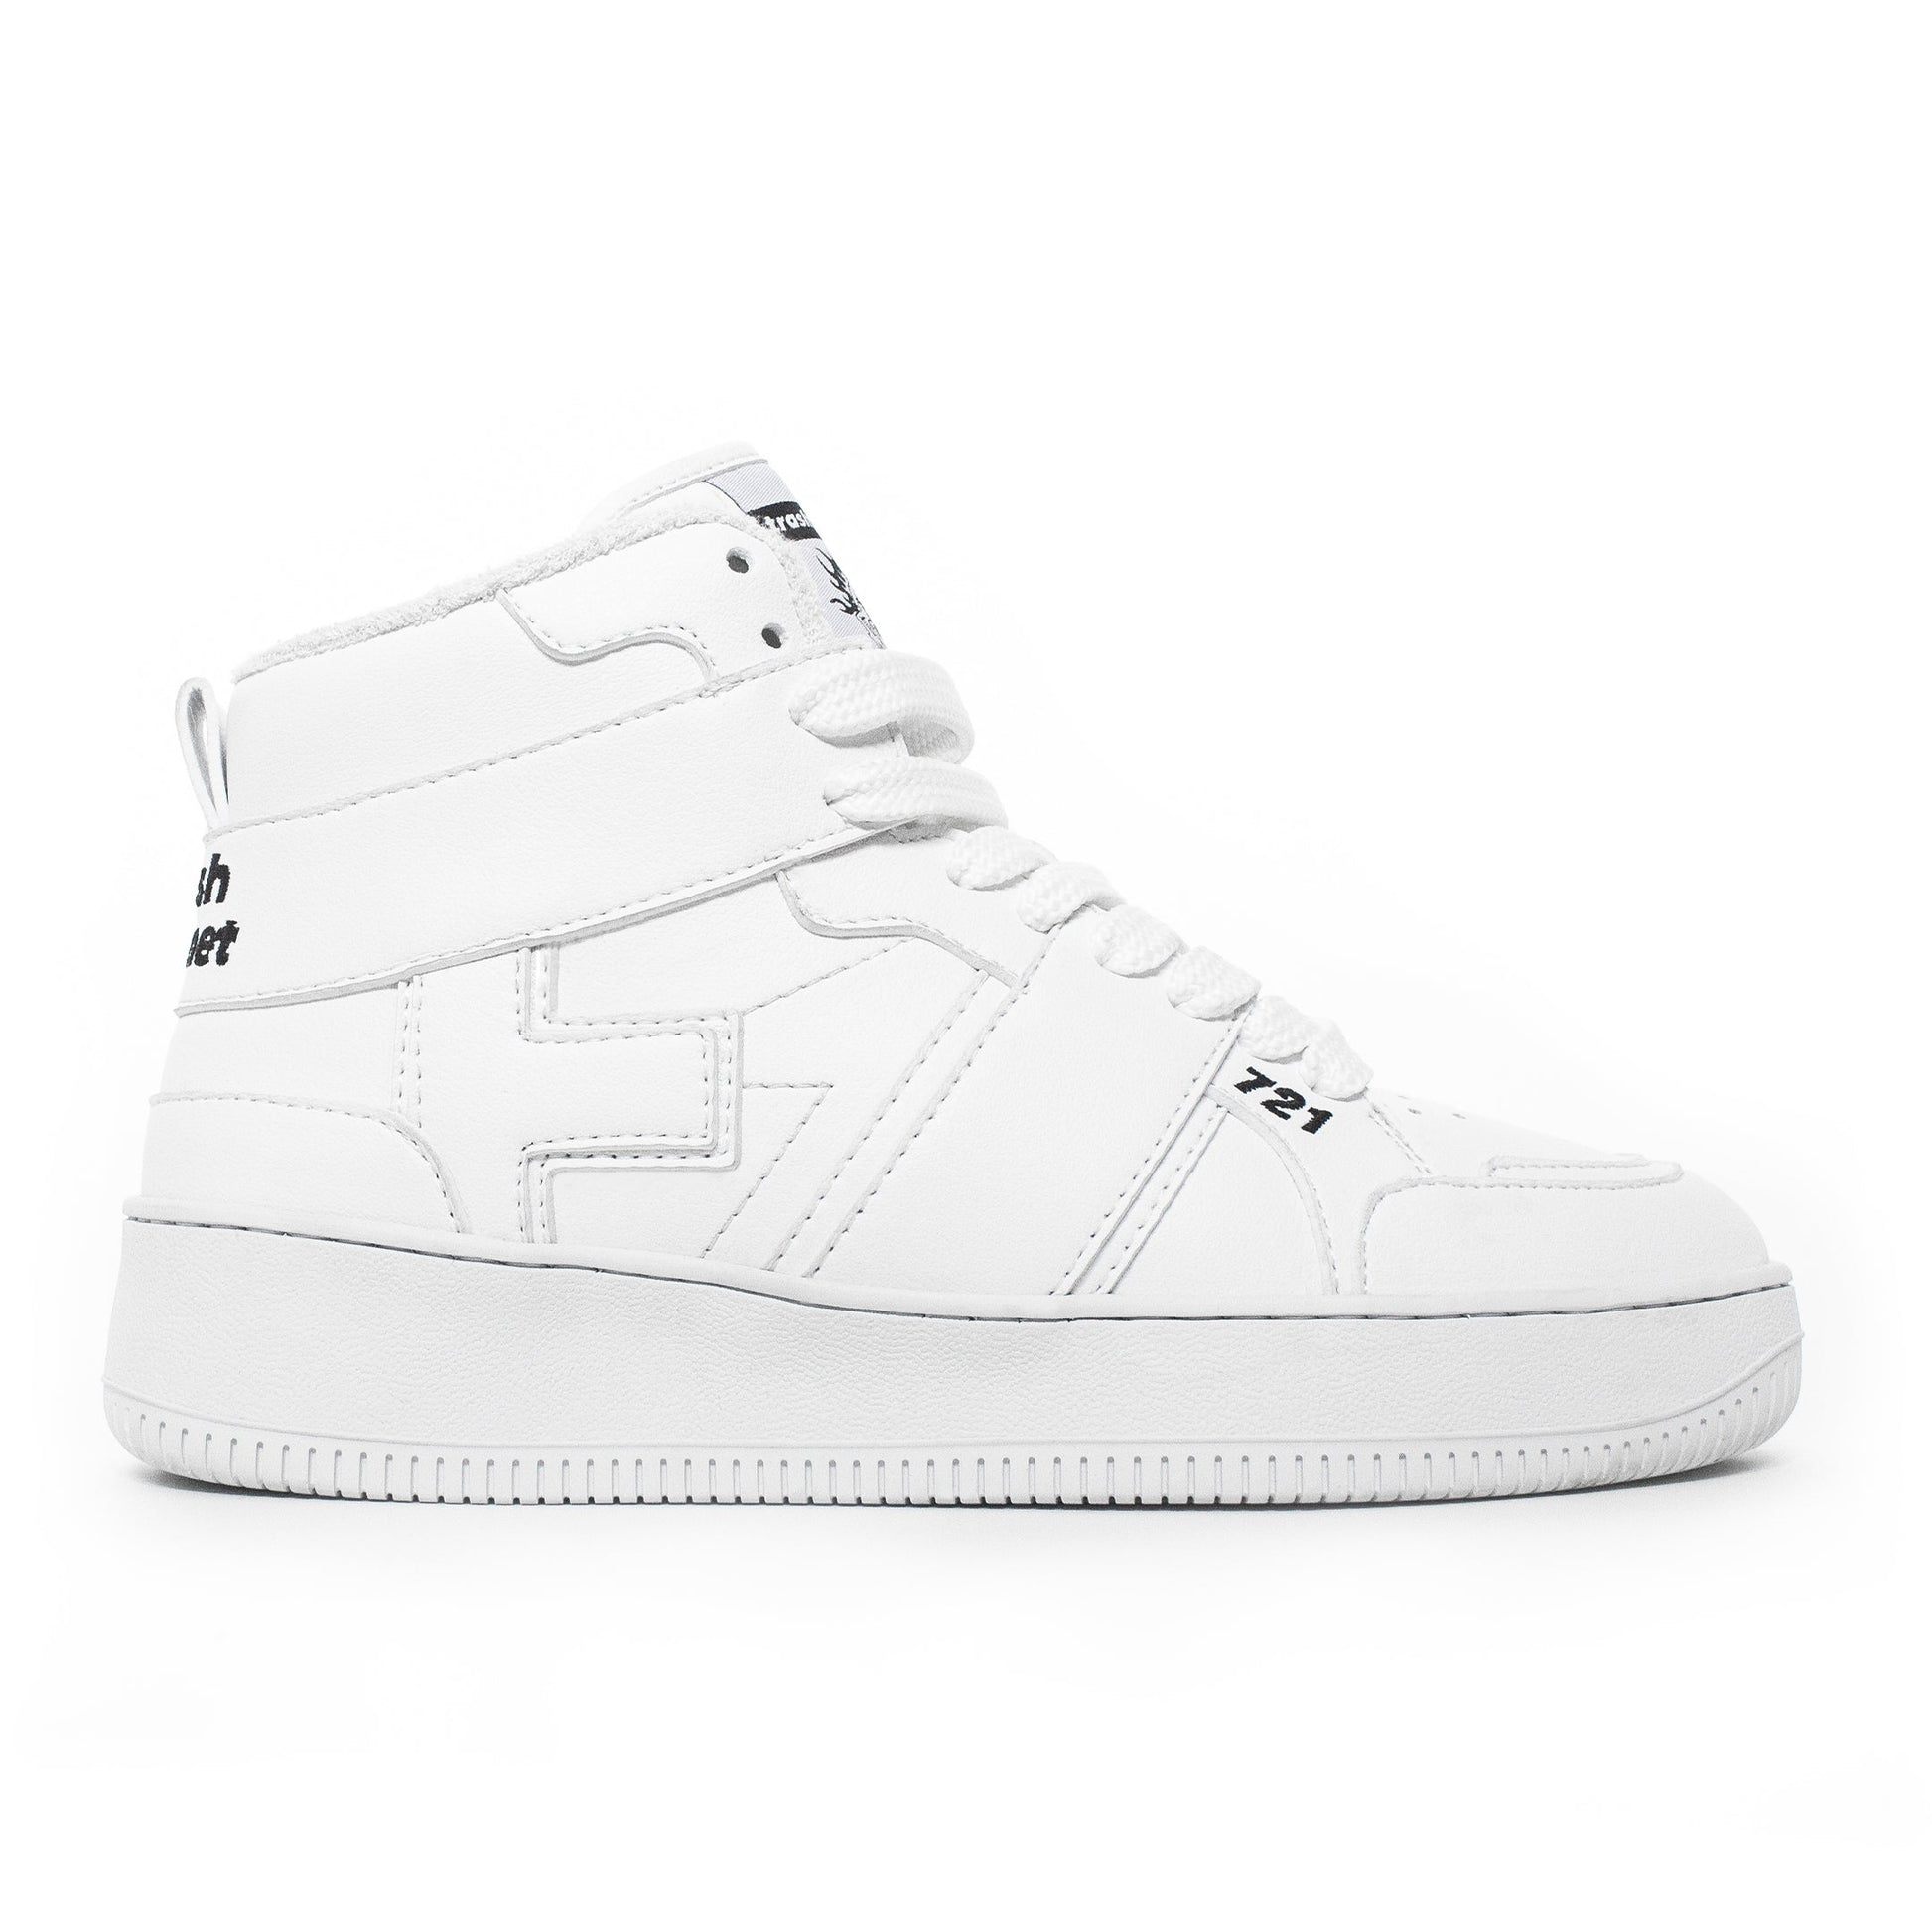 Side view of a recycled vegan corn leather White High Top sneaker by Trash Planet